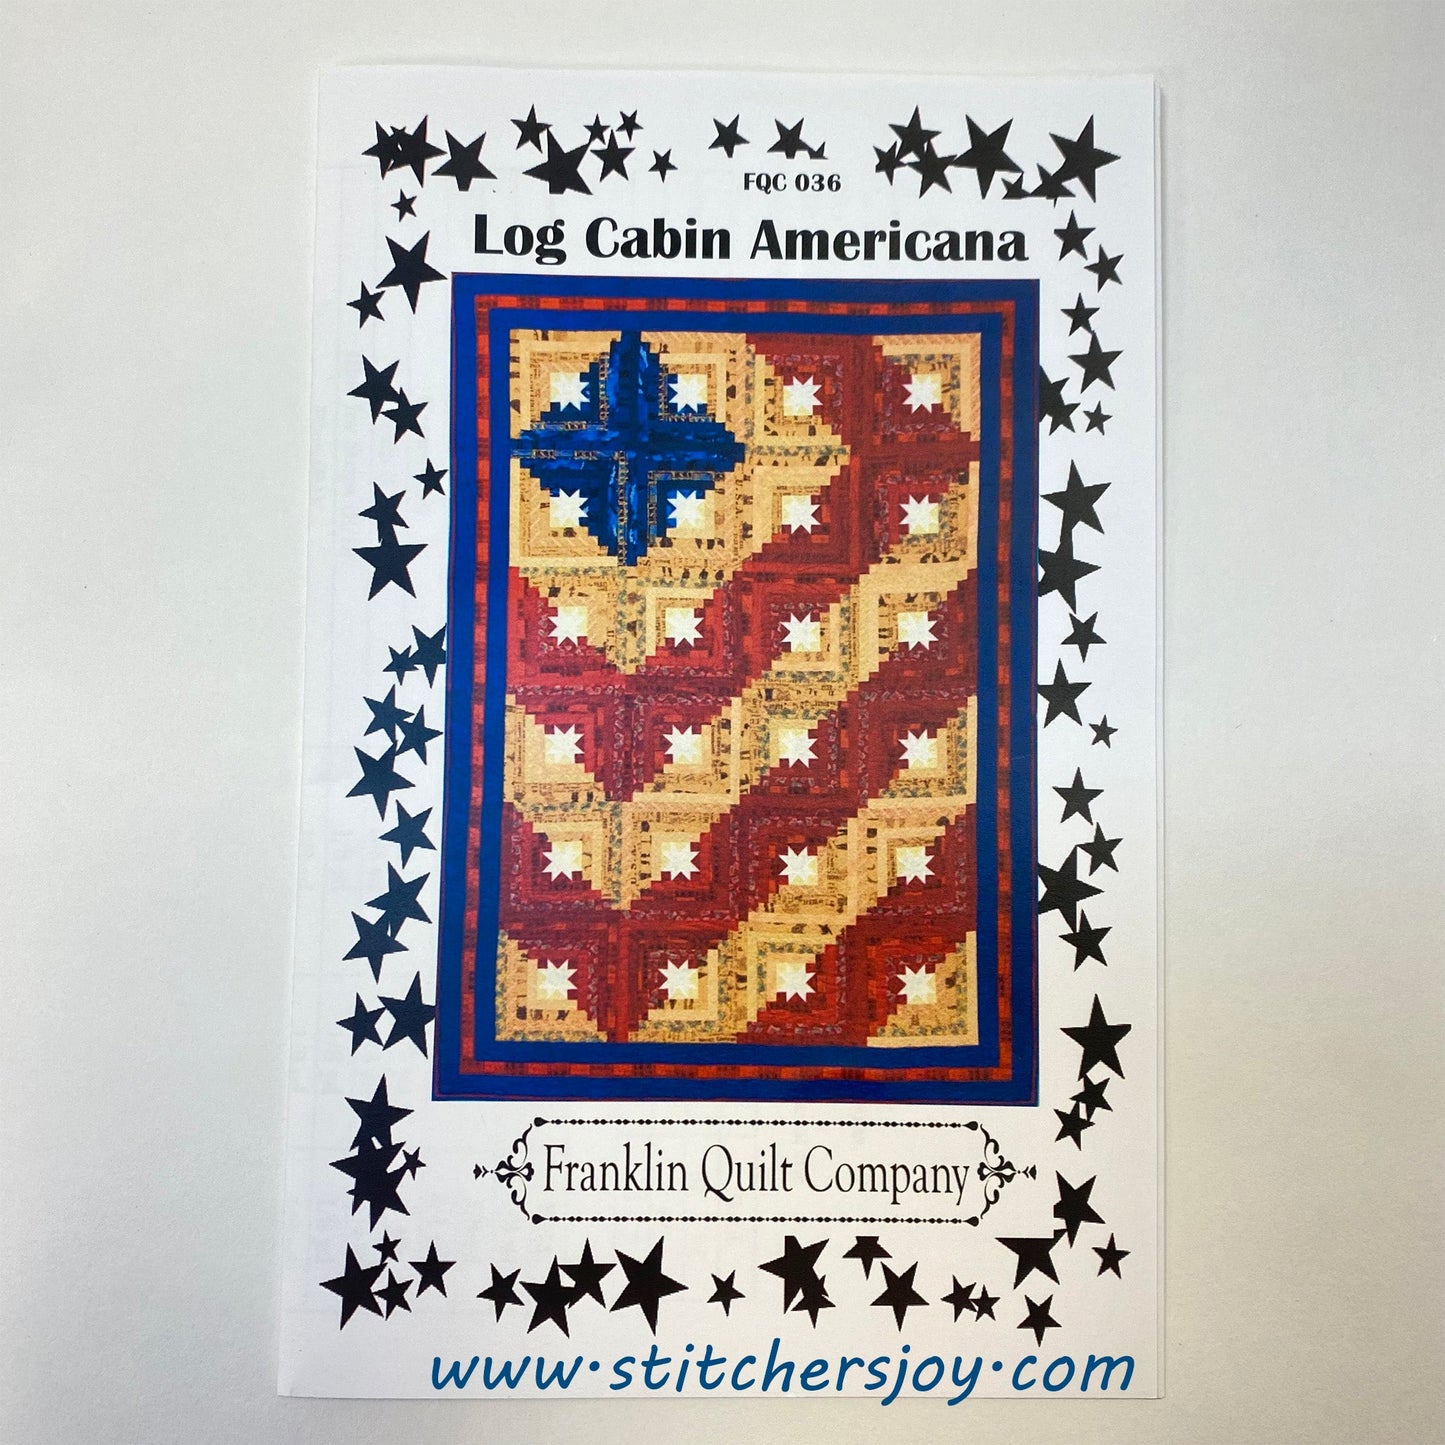 Log Cabin Americana quilt pattern front cover by Franklin Quilt Company features a red, white, blue, and cream colored quilt made of log cabin blocks built around a white center star. The setting is a barn-raising pattern with four blue/cream cabin blocks surrounded by red/cream cabin blocks to create stripes across the quilt. The pattern in the colorway would be perfect for a patriotic quilt or Quilts of Valor, or the colors are easily changed to any color scheme for the star in your life.